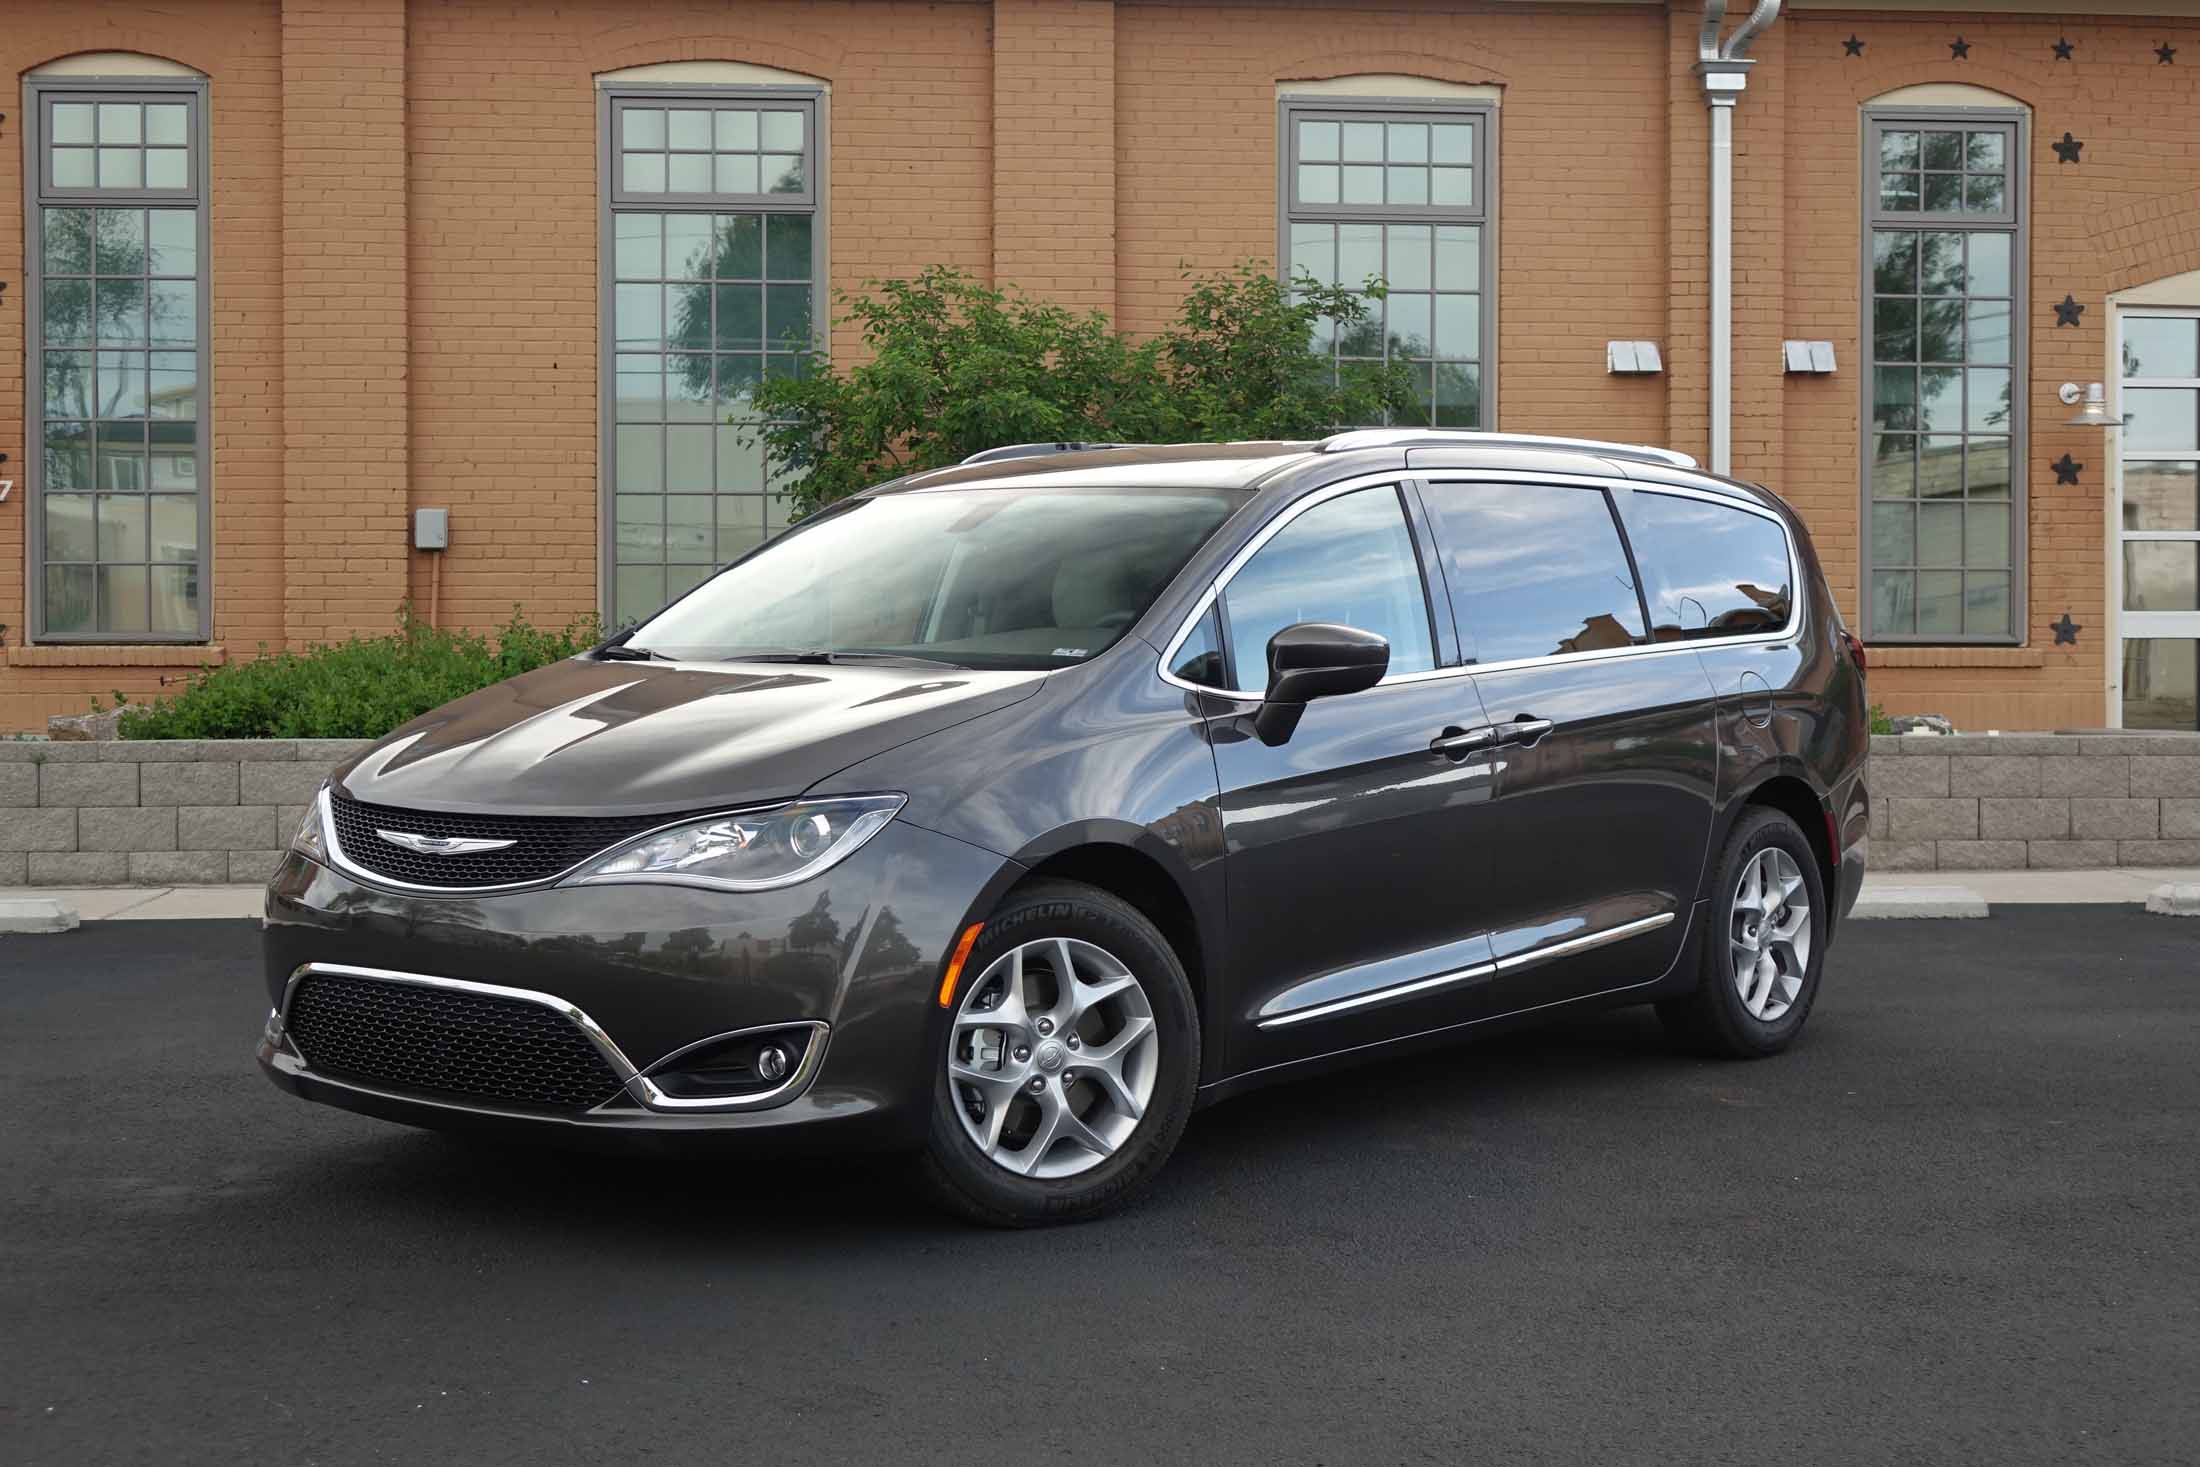 2017 Chrysler Pacifica fuel economy review